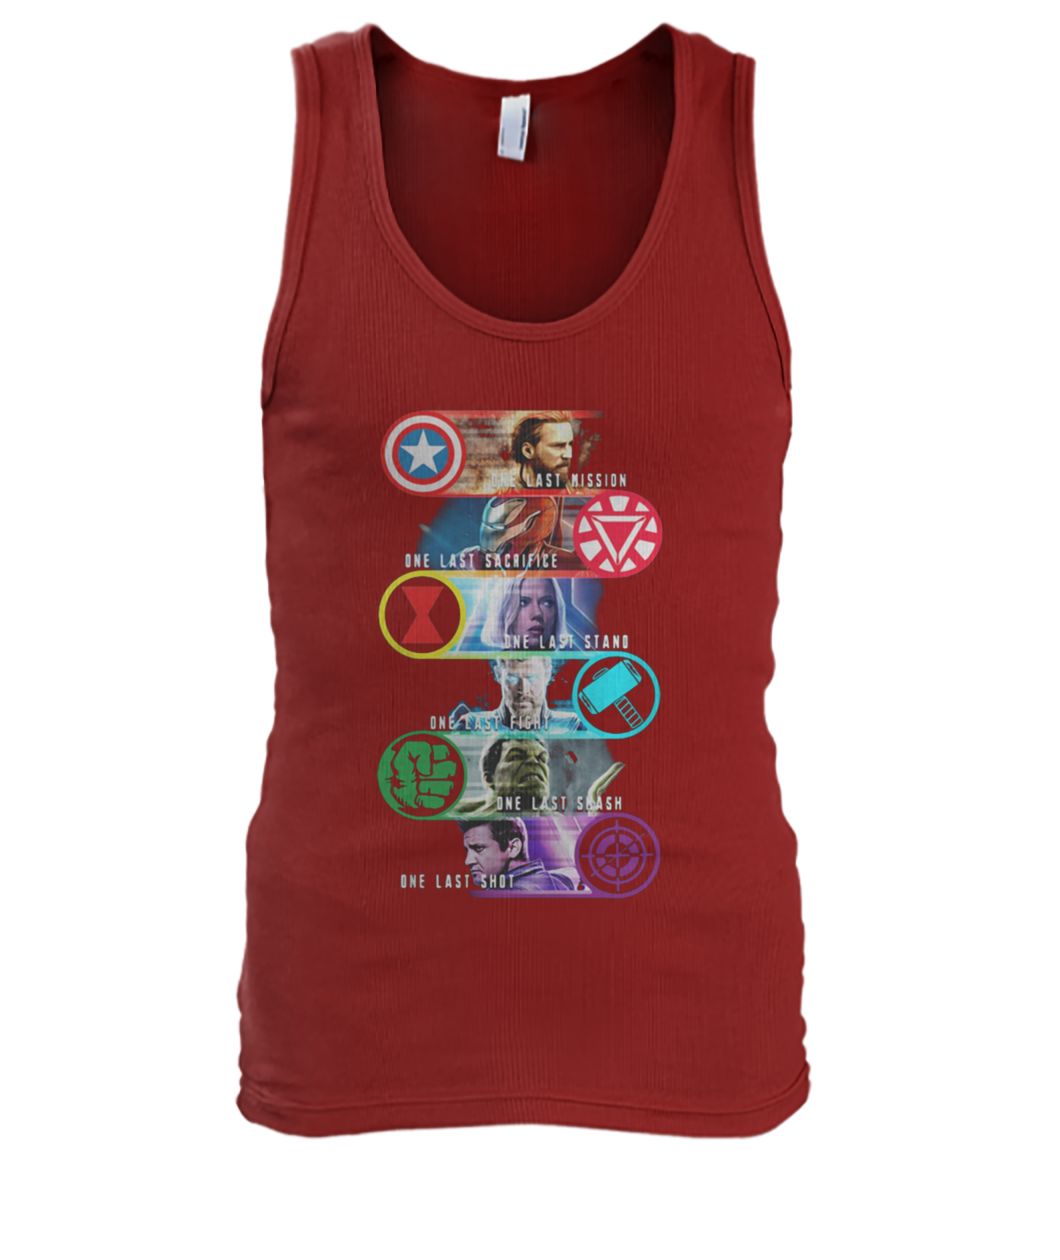 Avengers last mission one last sacrifice one last stand one east fight men's tank top